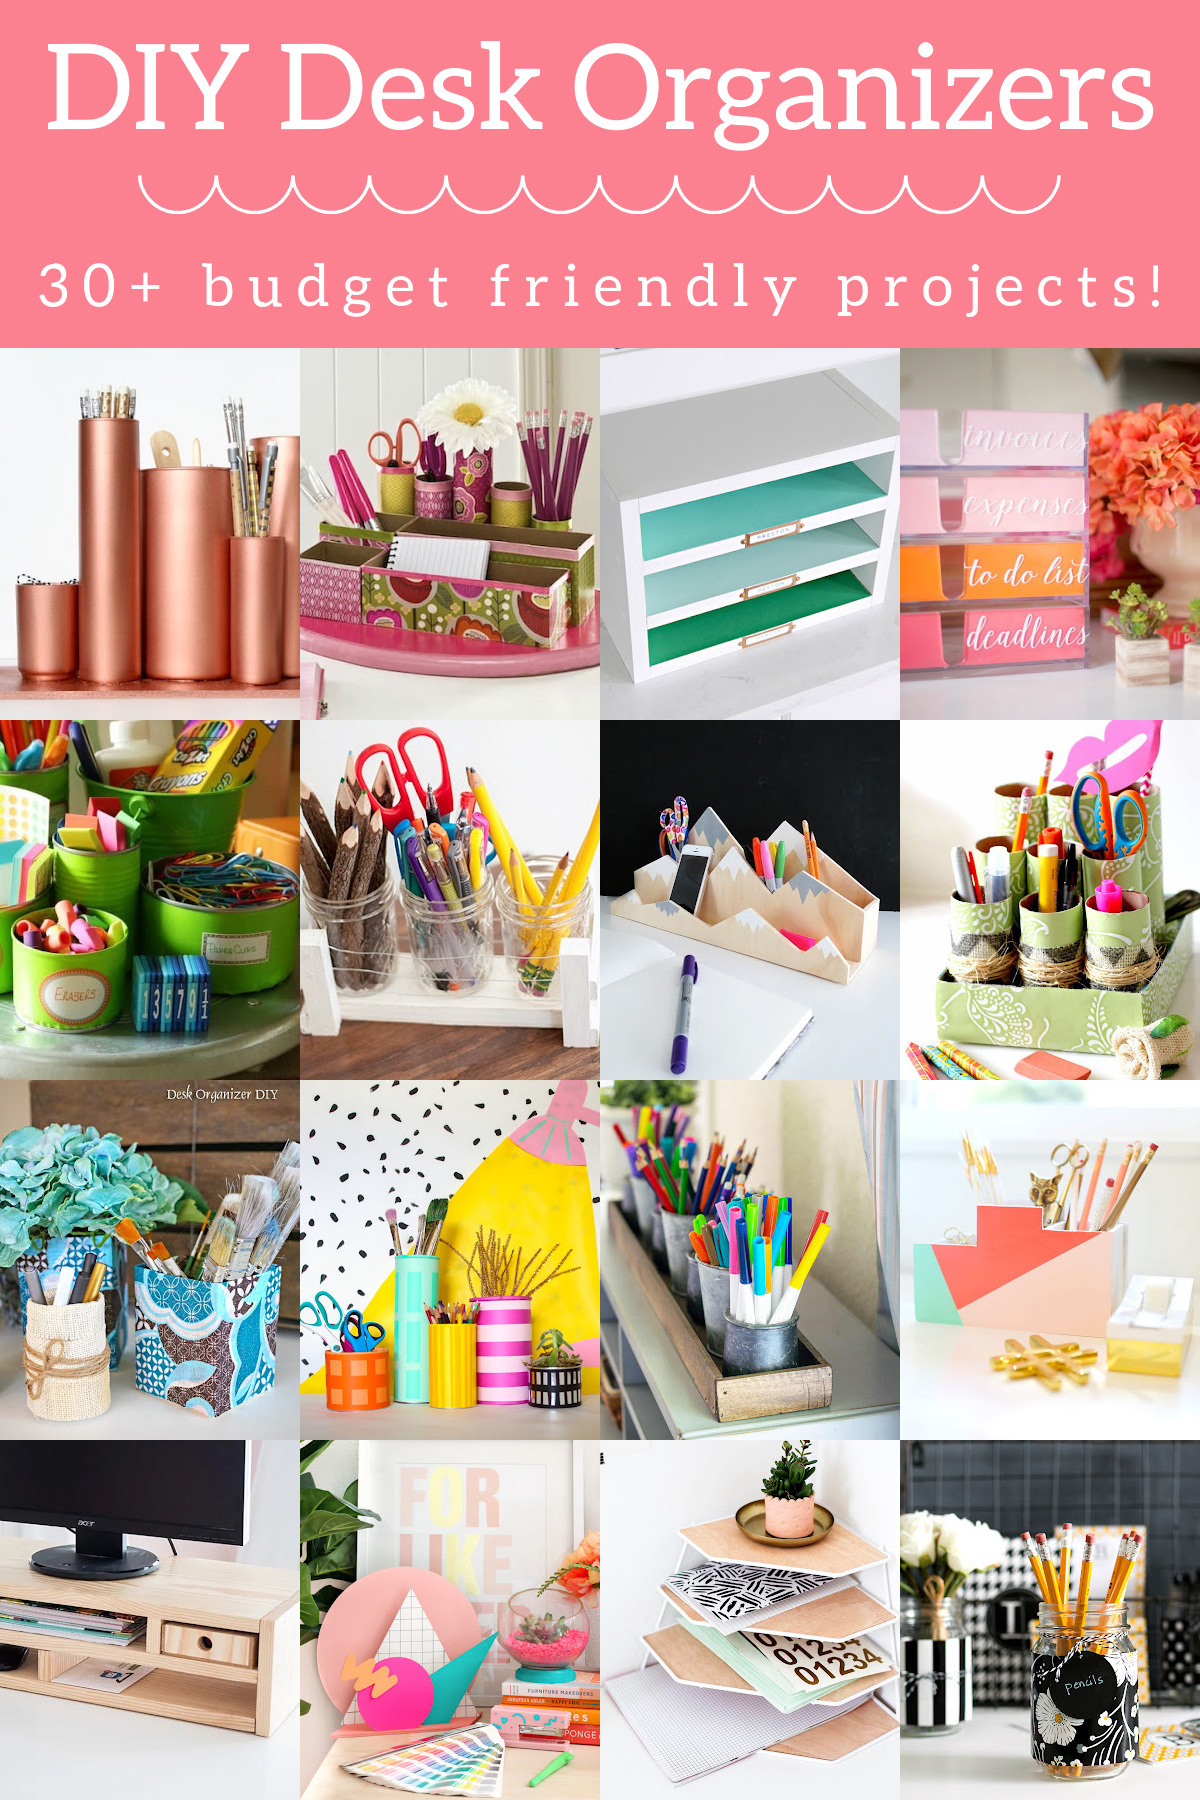 DIY Desk Organizers to Tidy Up Your Office